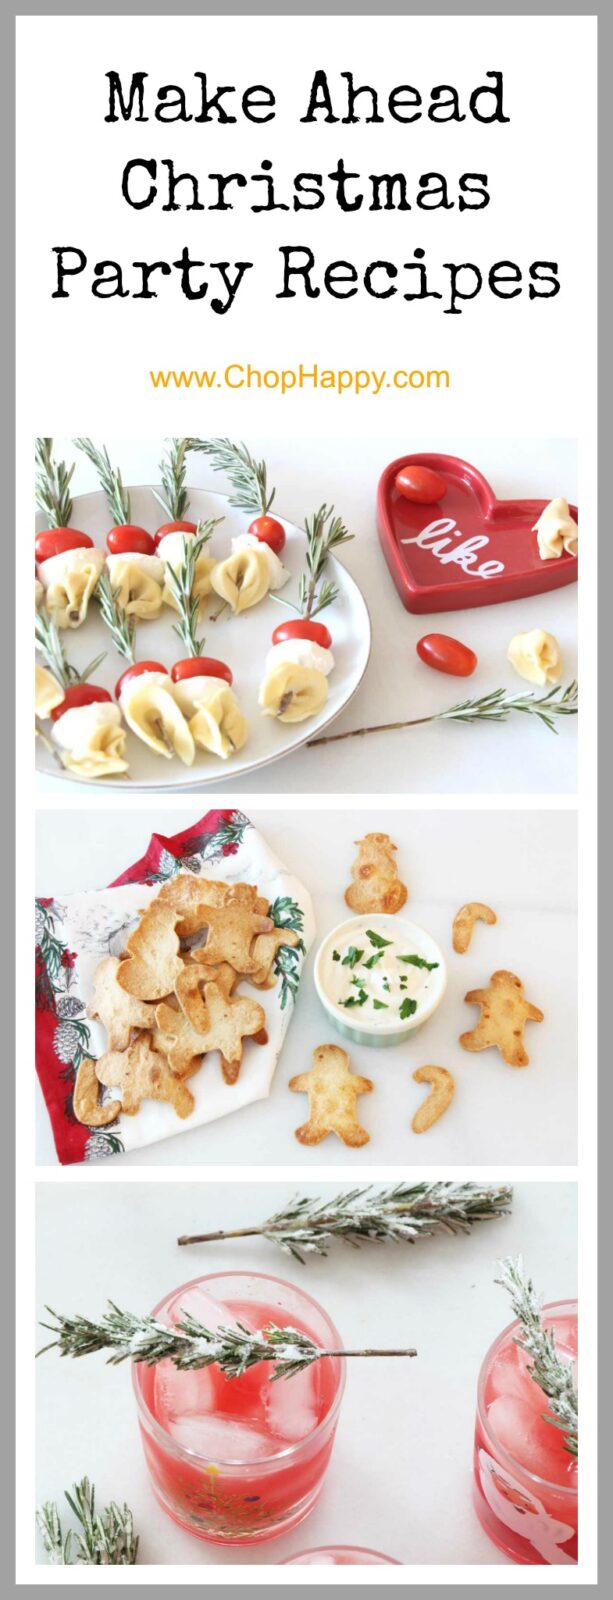 Make Ahead Christmas Party Recipes - that are super easy, fun, and filled with comfort food love for your family and friends. www.ChopHappy.com #ChristmasRecipe